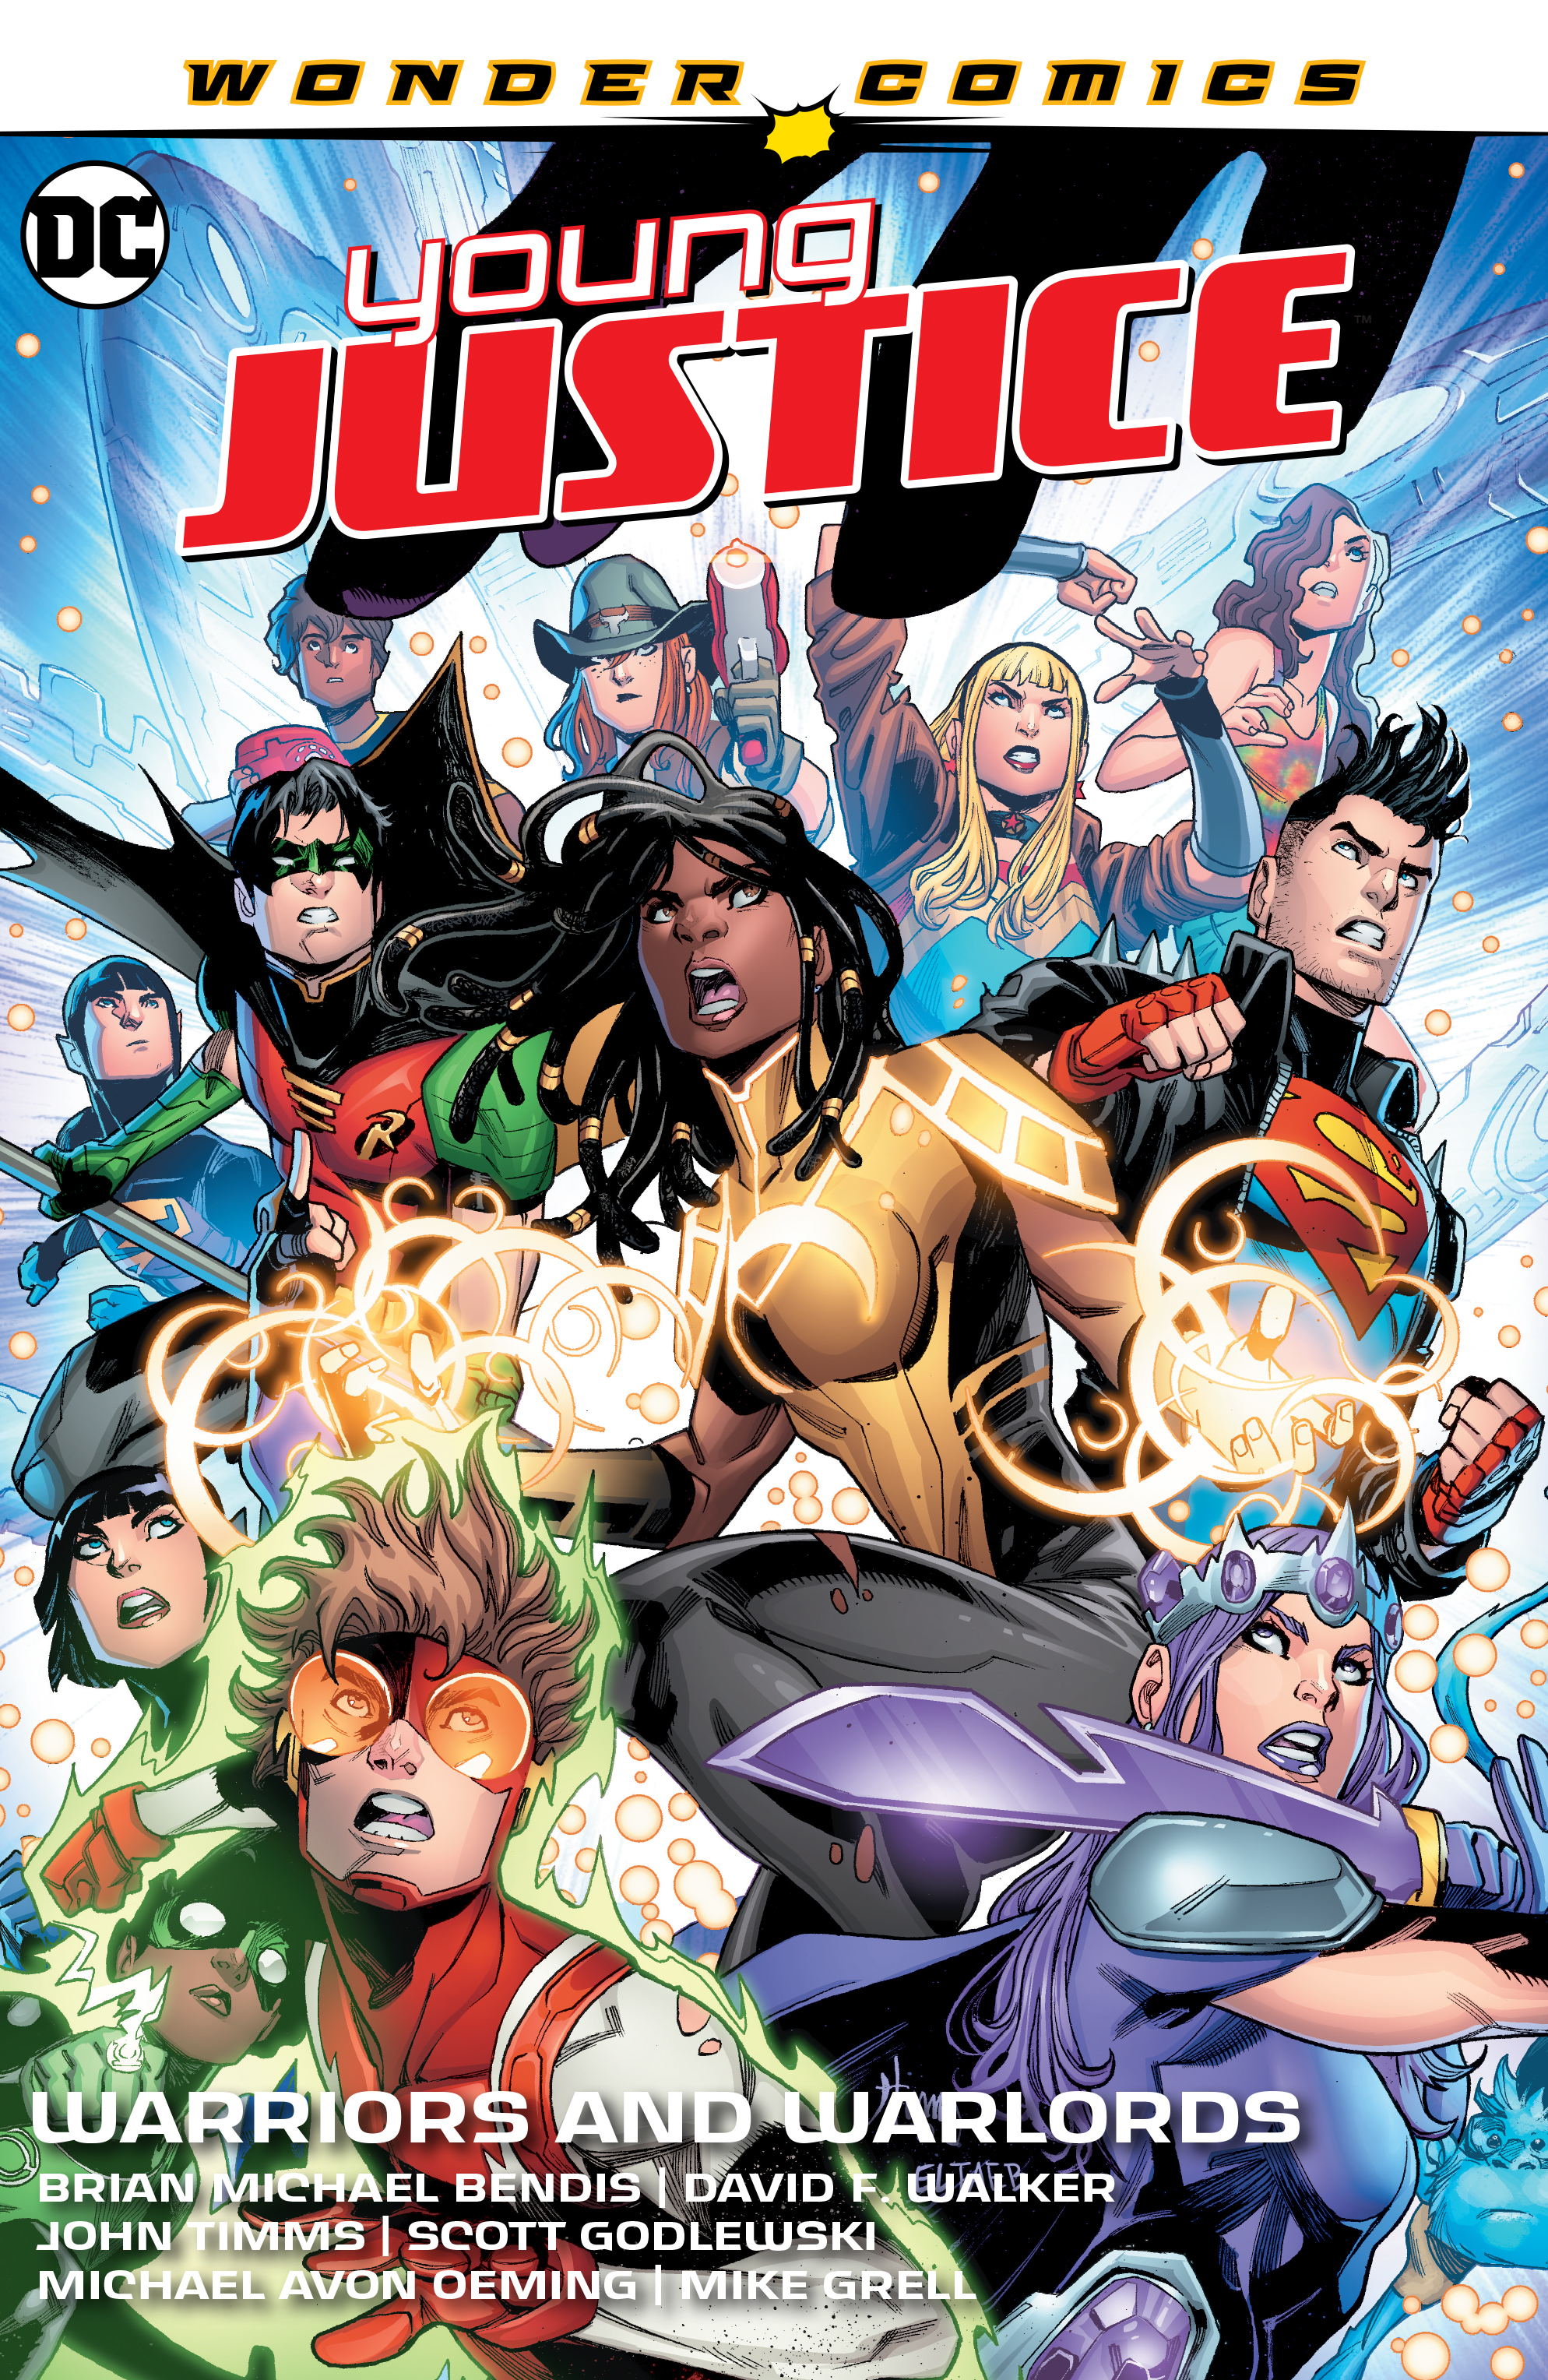 Young Justice Graphic Novel Volume 3 Warriors And Warlords